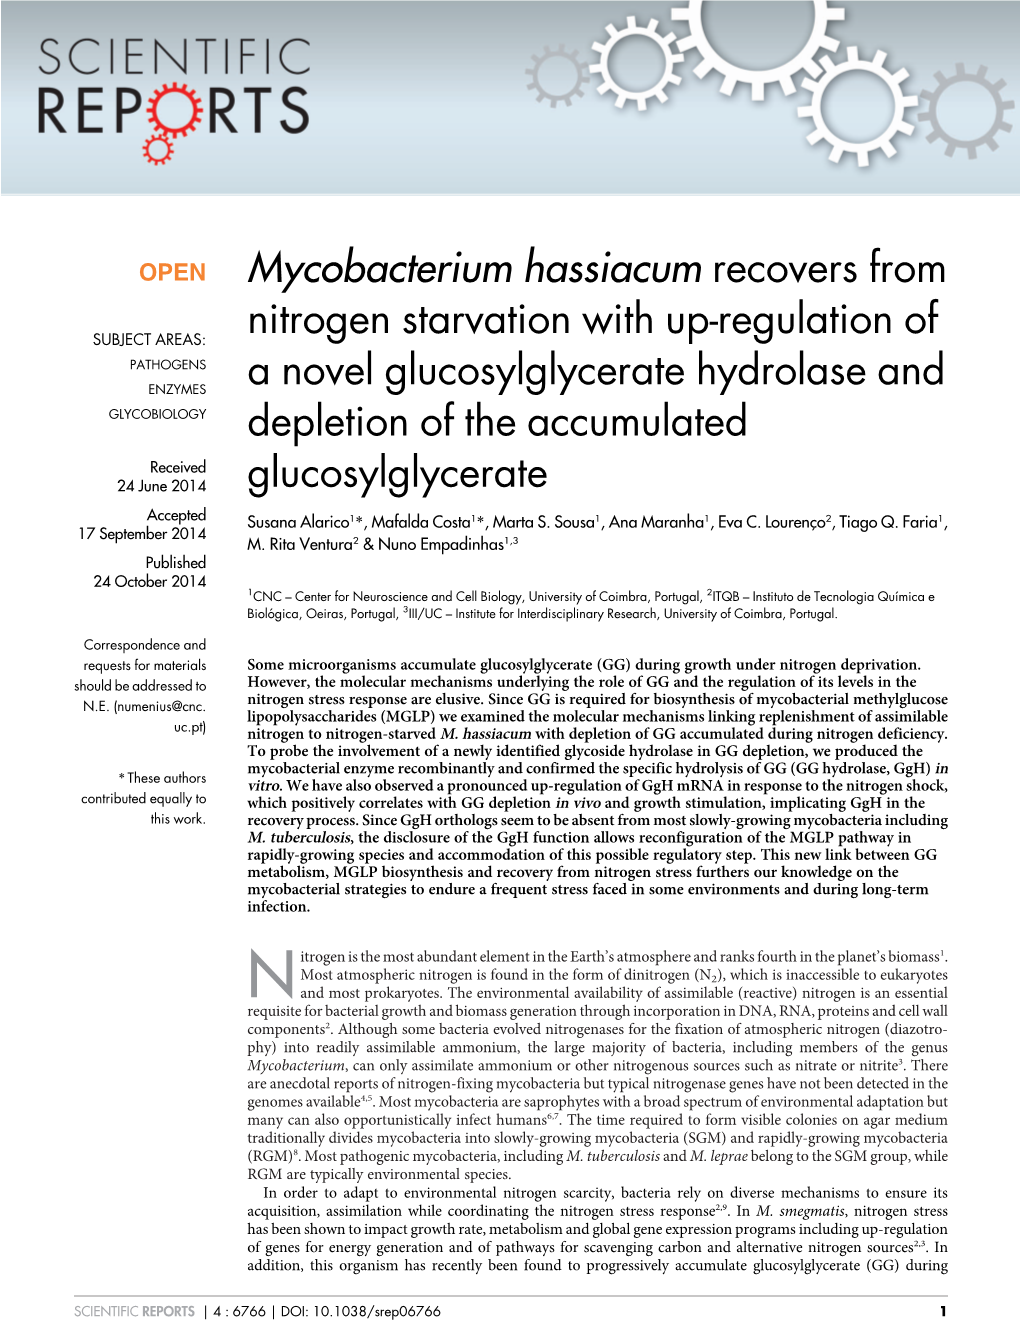 Mycobacterium Hassiacum Recovers from Nitrogen Starvation with Up